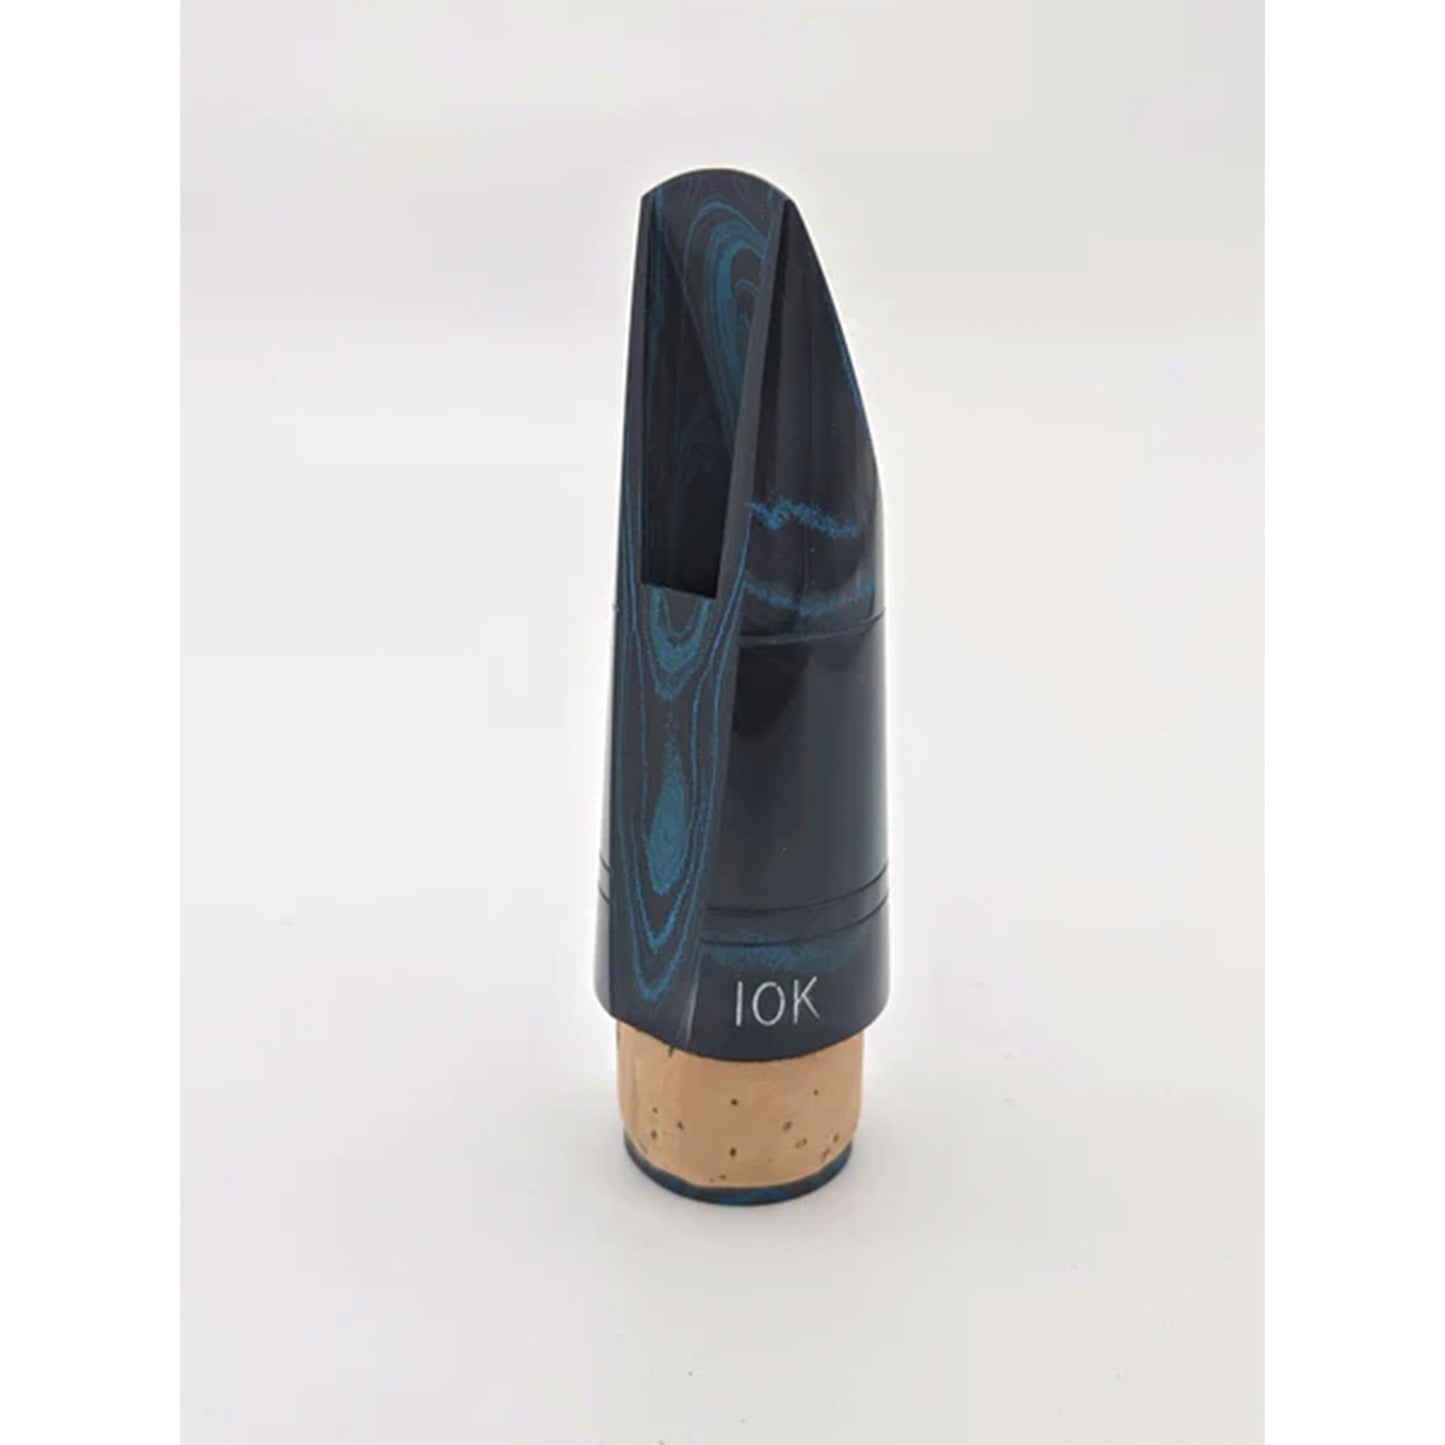 Three-quarters rear side view of blue marbled Fobes 10k Bb mouthpiece on a gray background